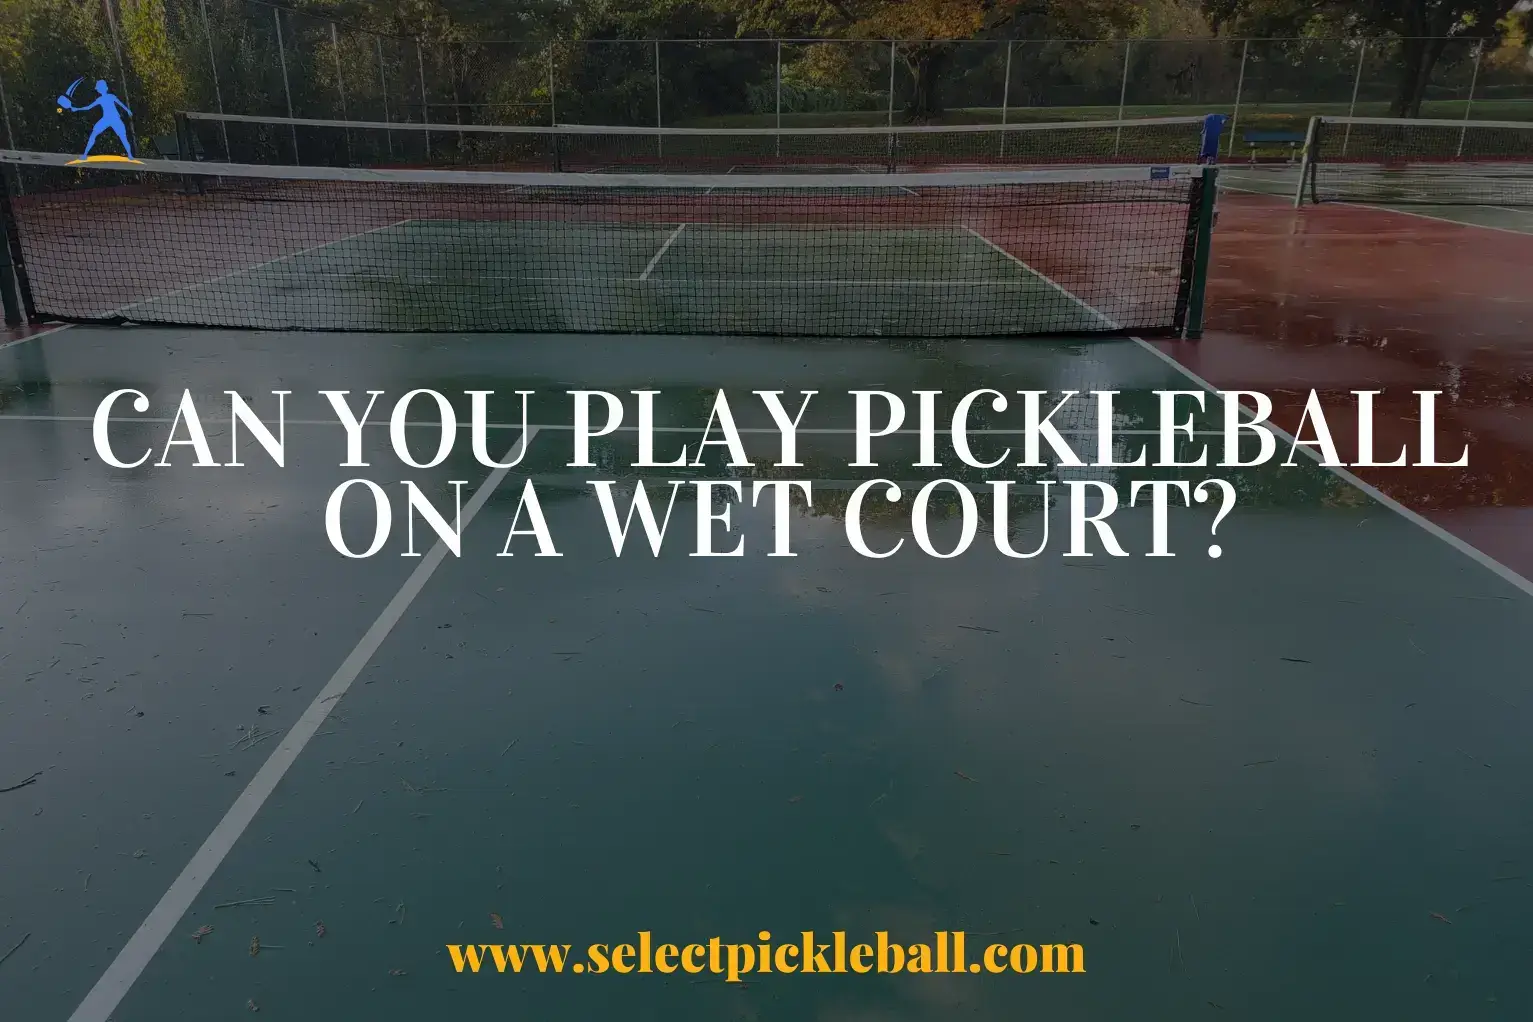 Can you play pickleball on a wet court